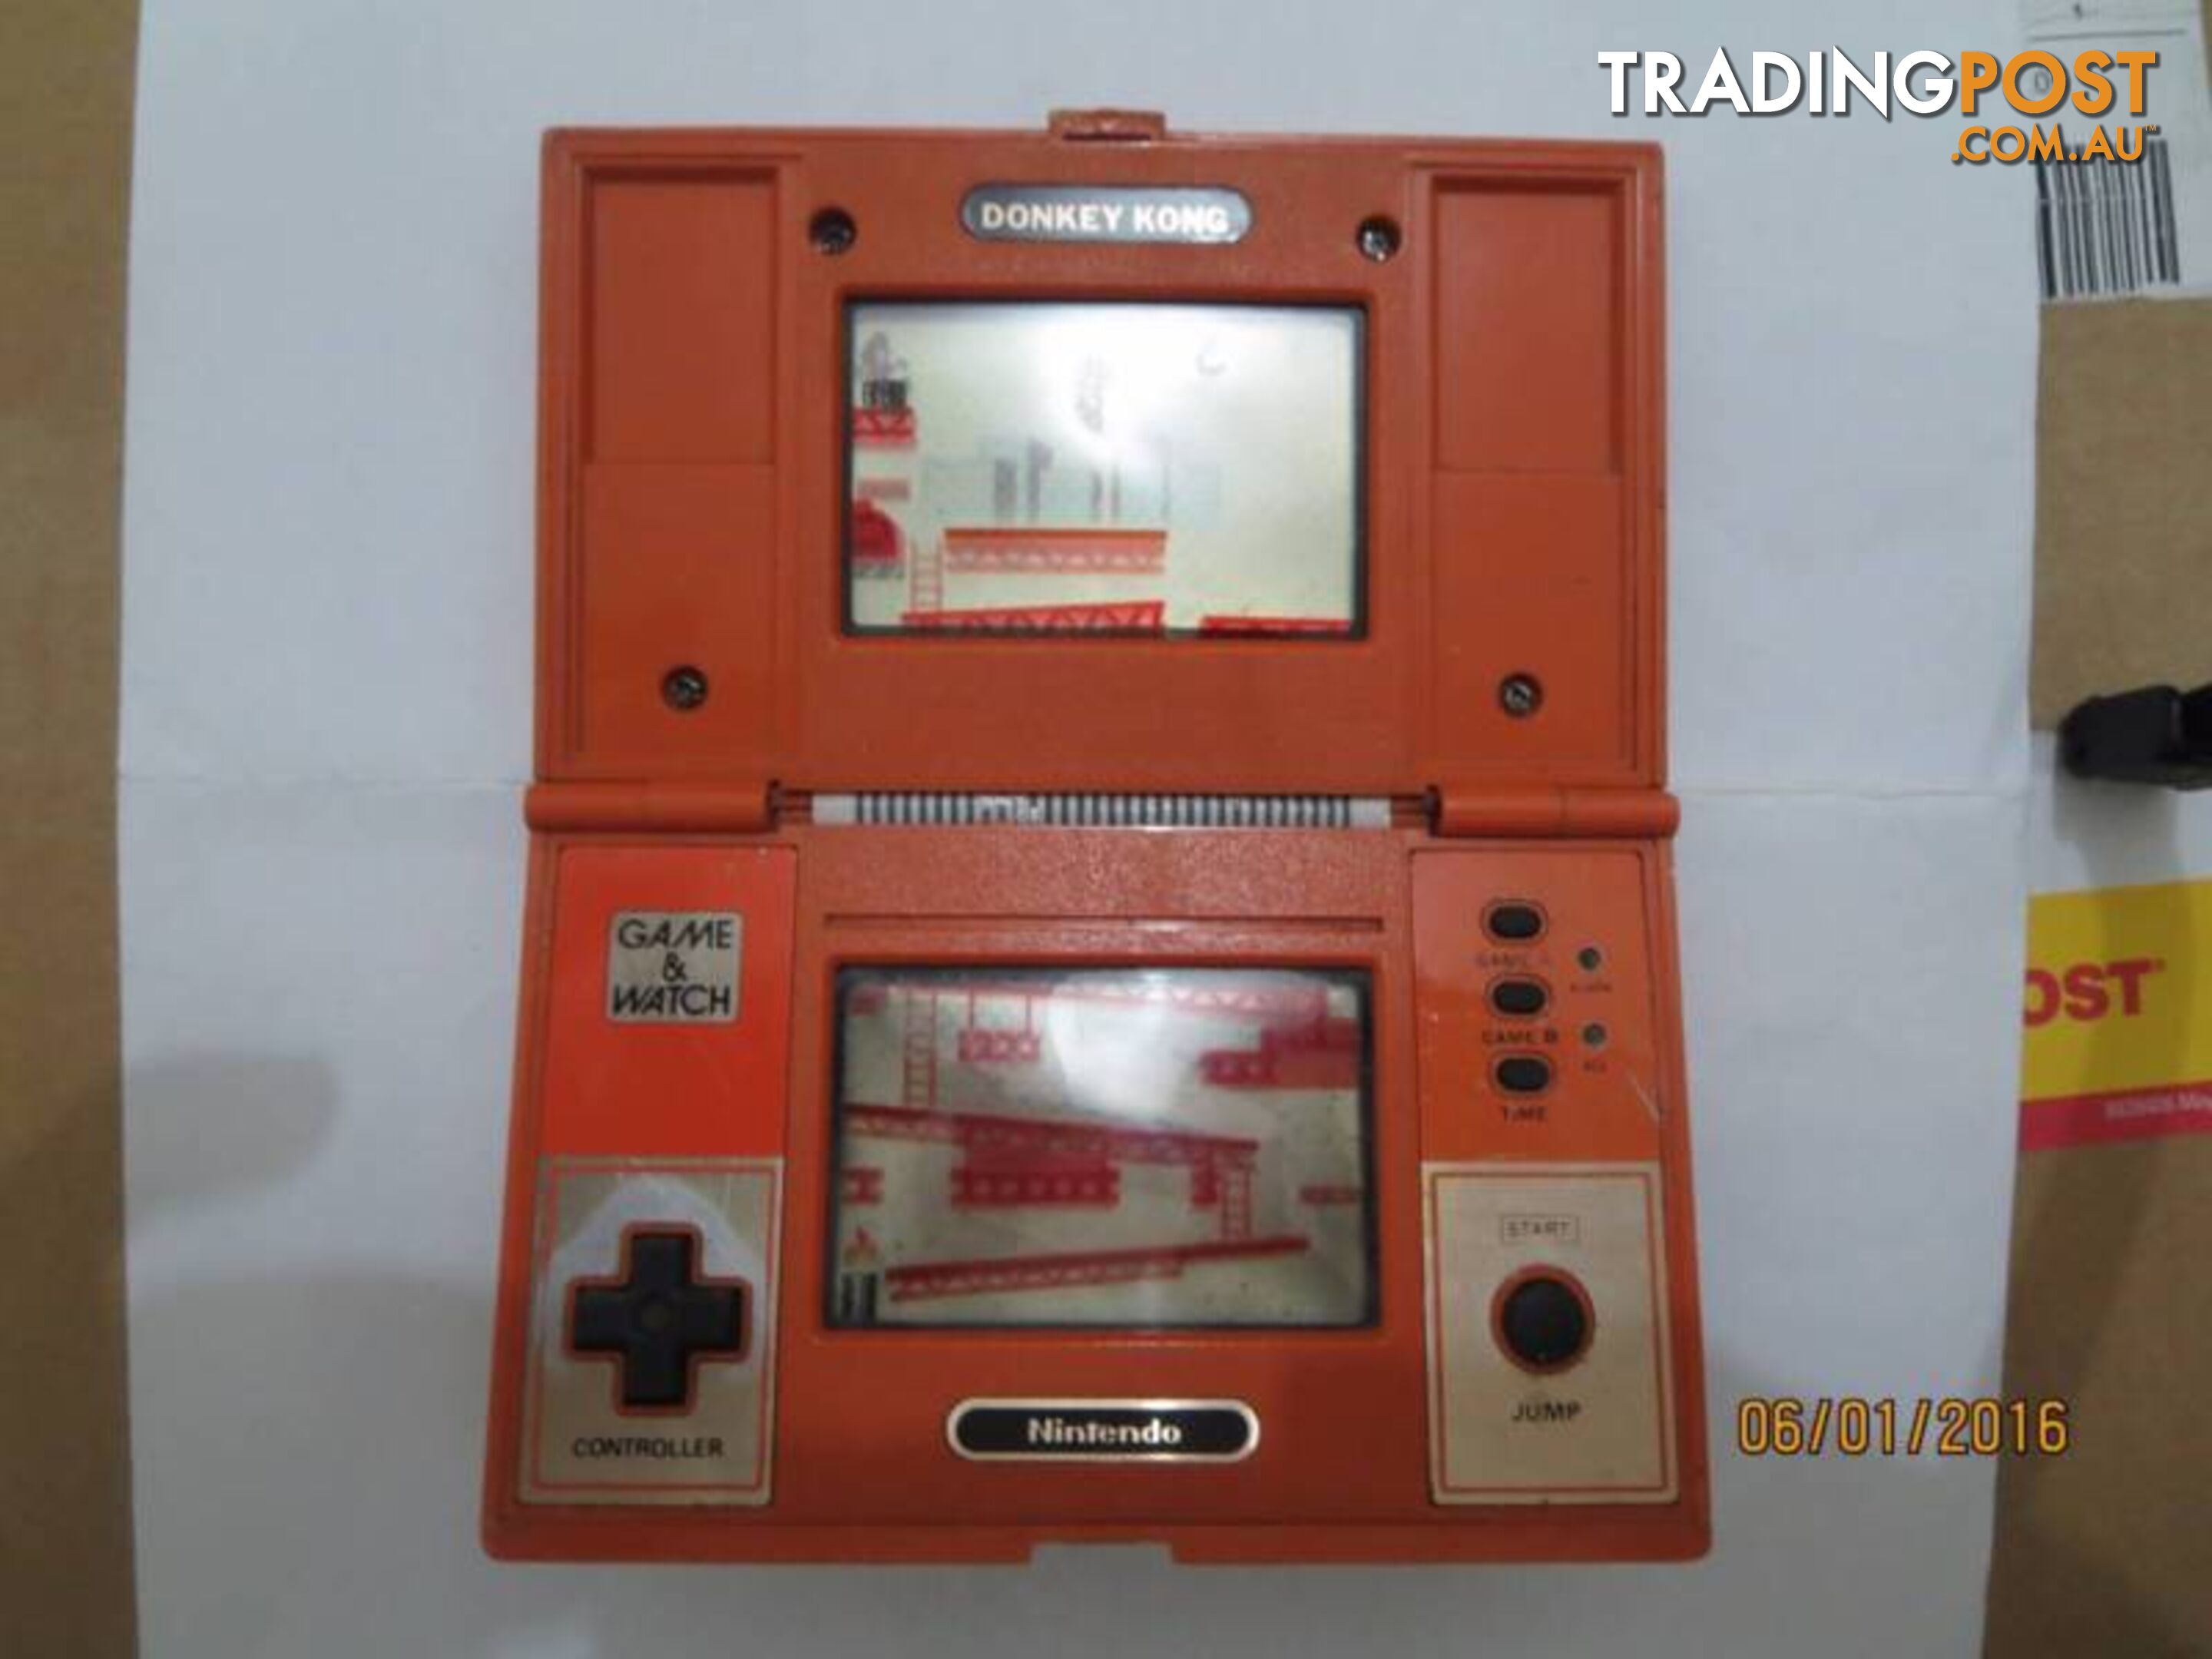 Few Nintendo Game And Watch